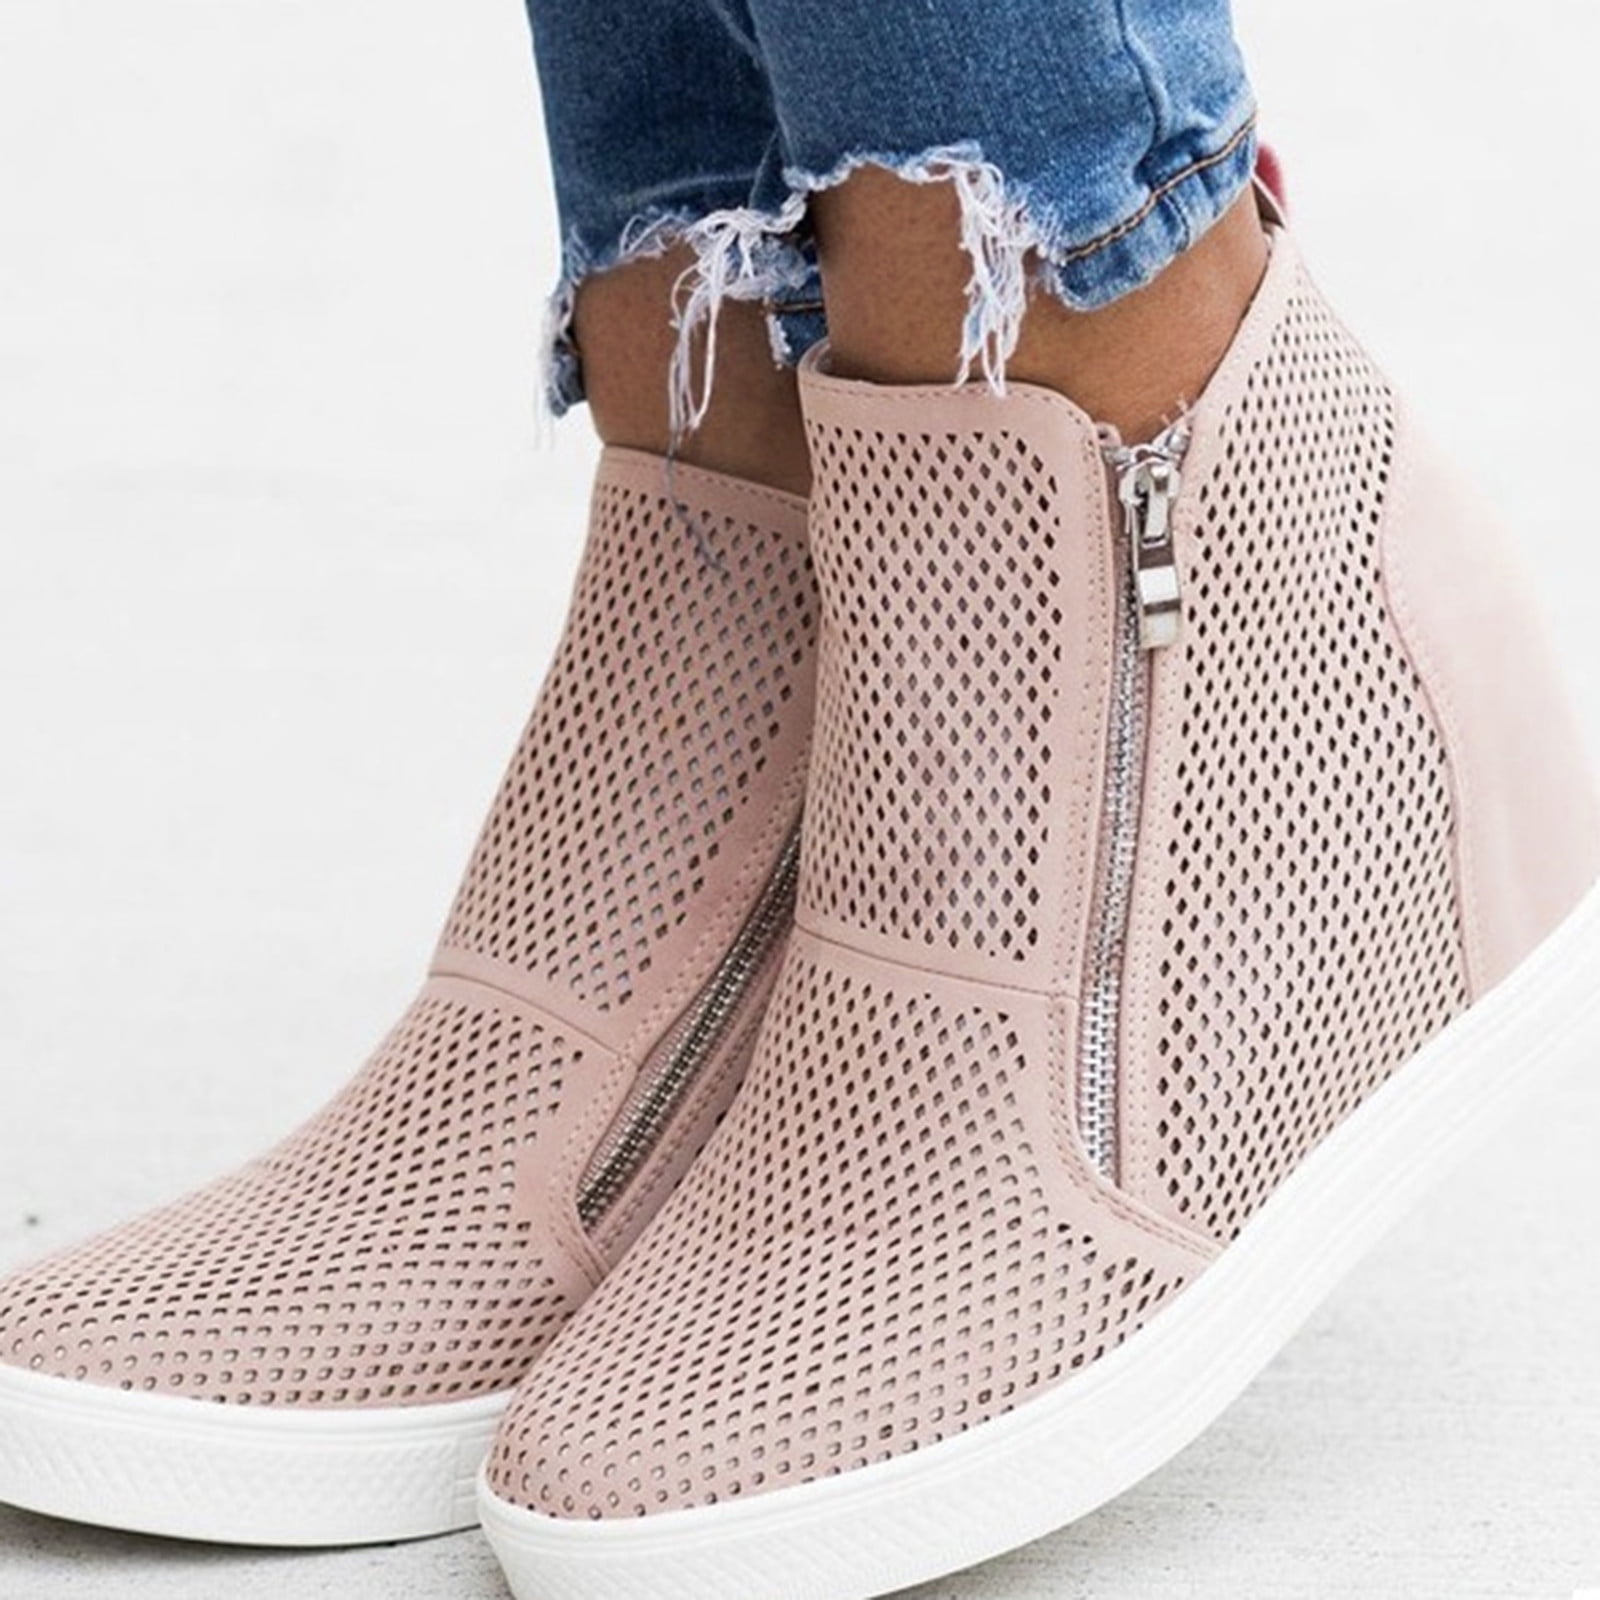 Cocci Wedge Platform Sneakers/Boots